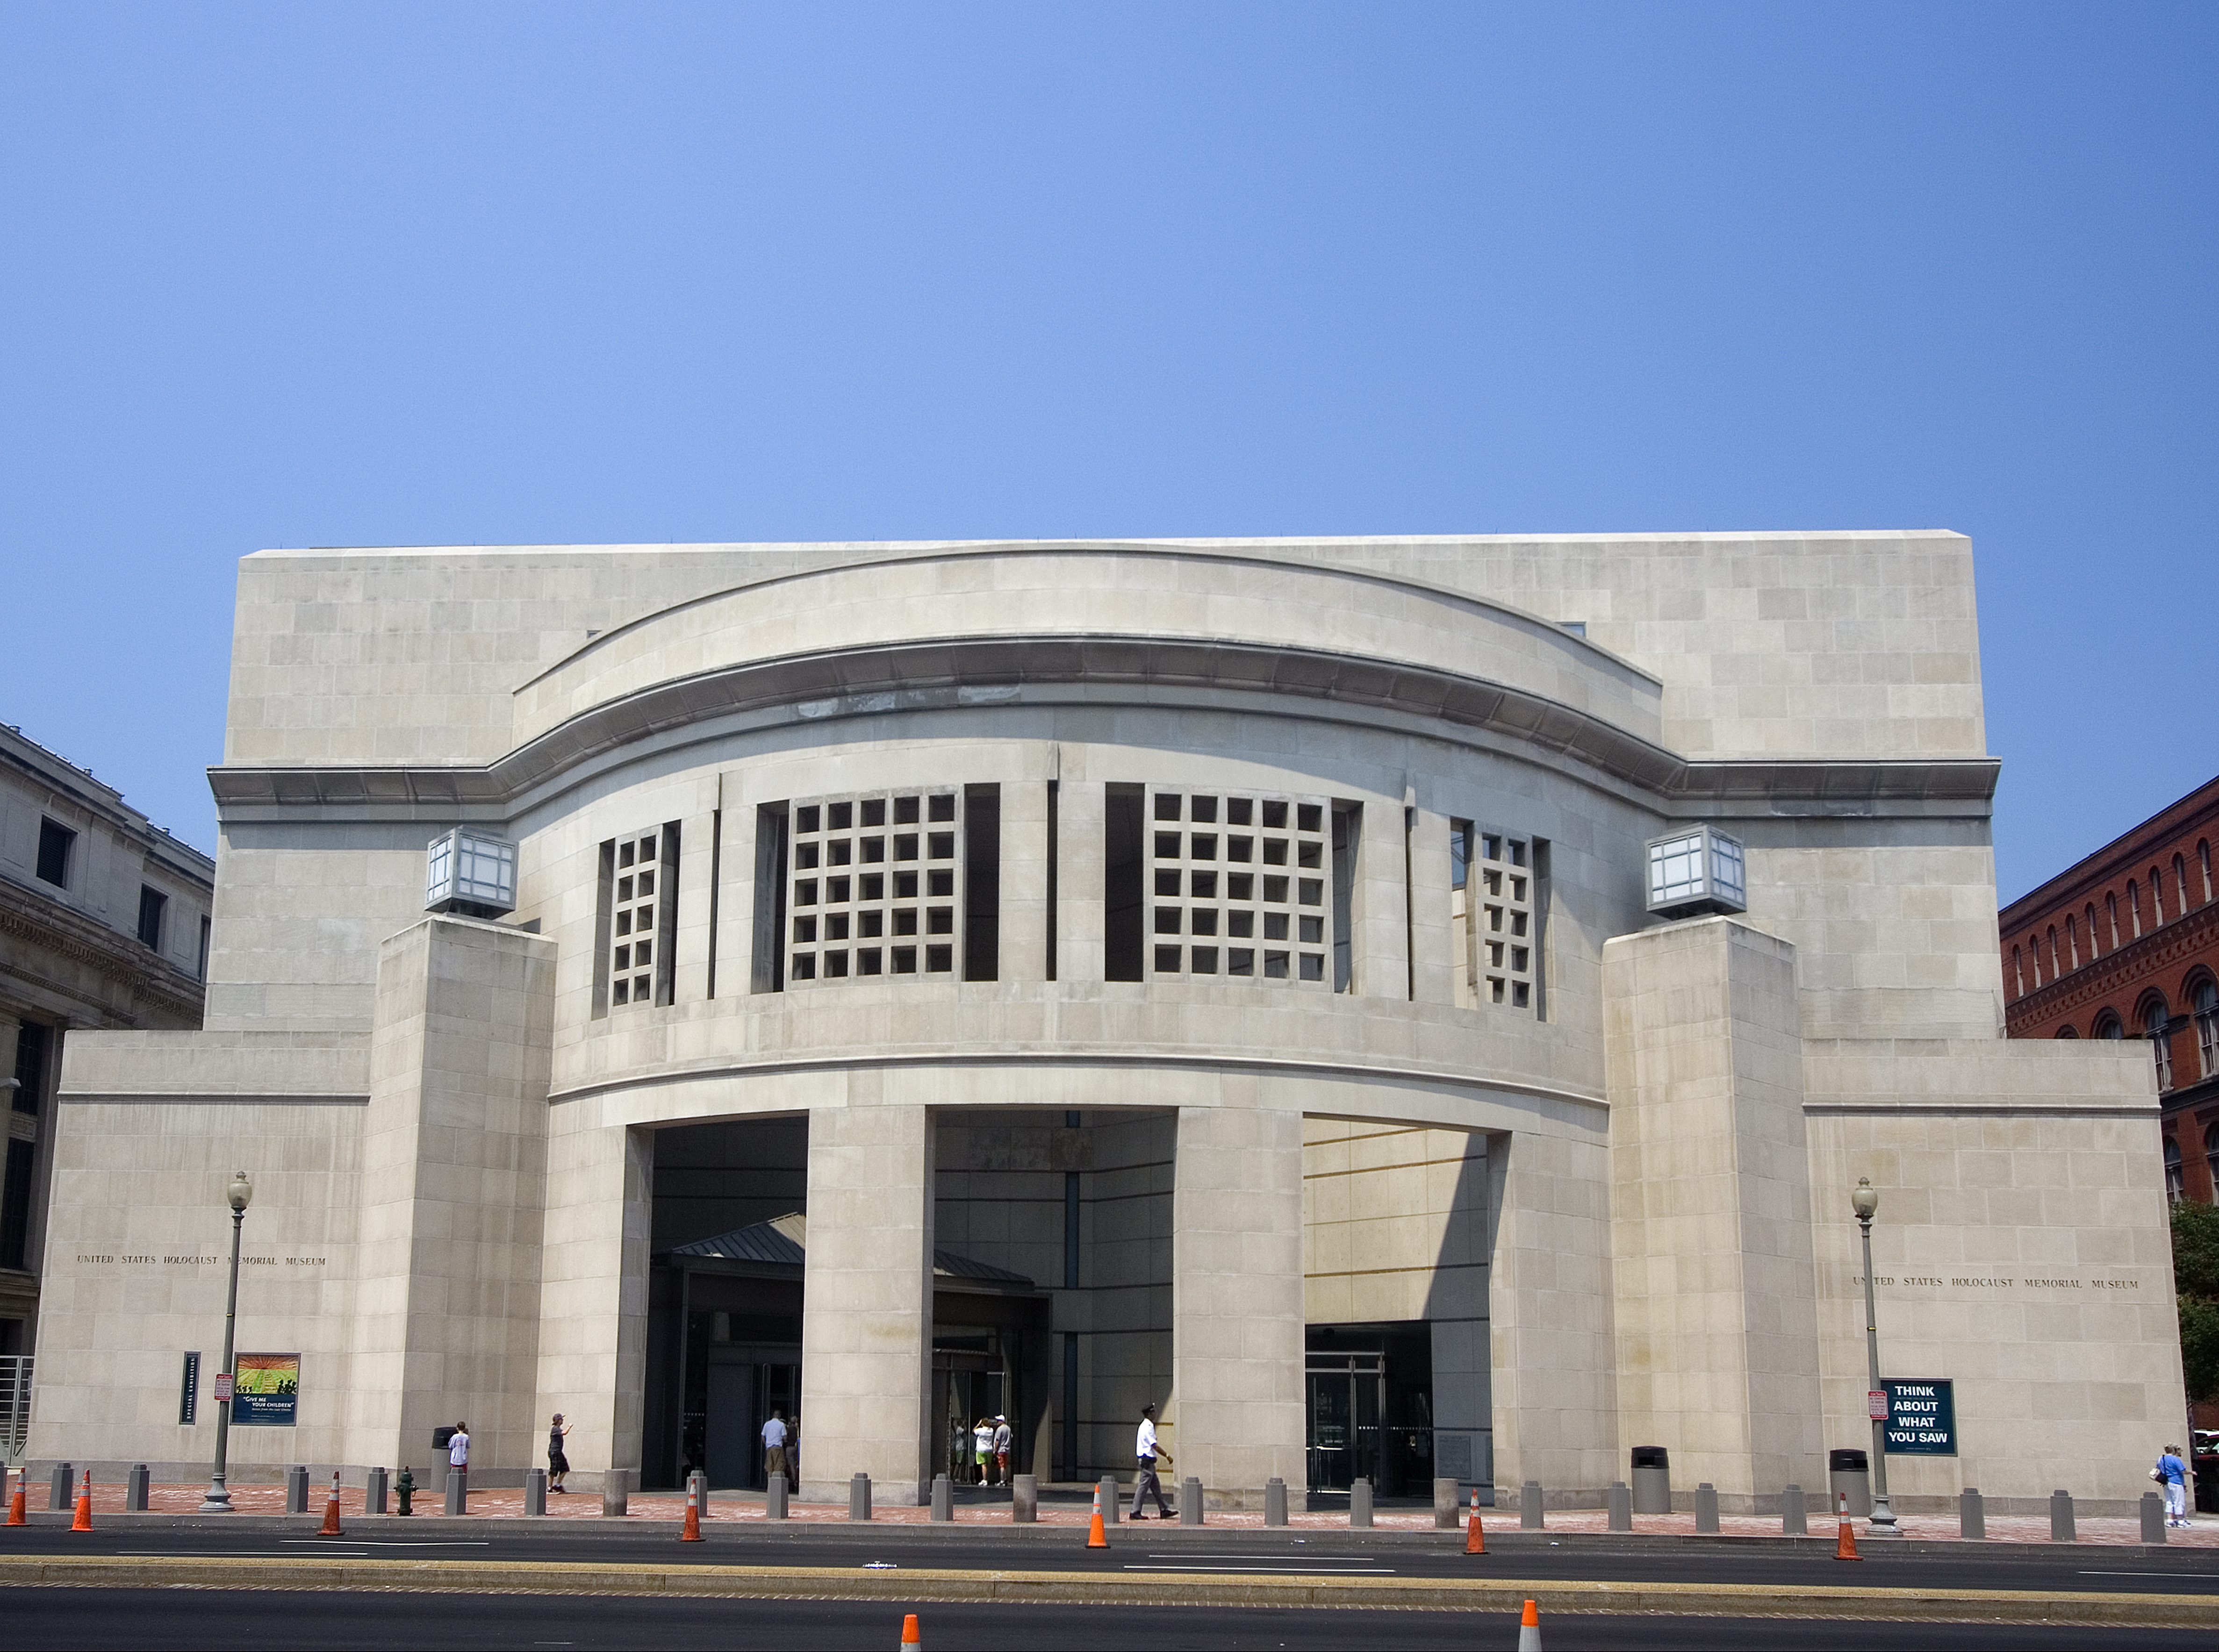 Holocaust Memorial Museum in Washington. (Paul Whitfield—Getty Images/Dorling Kindersley)